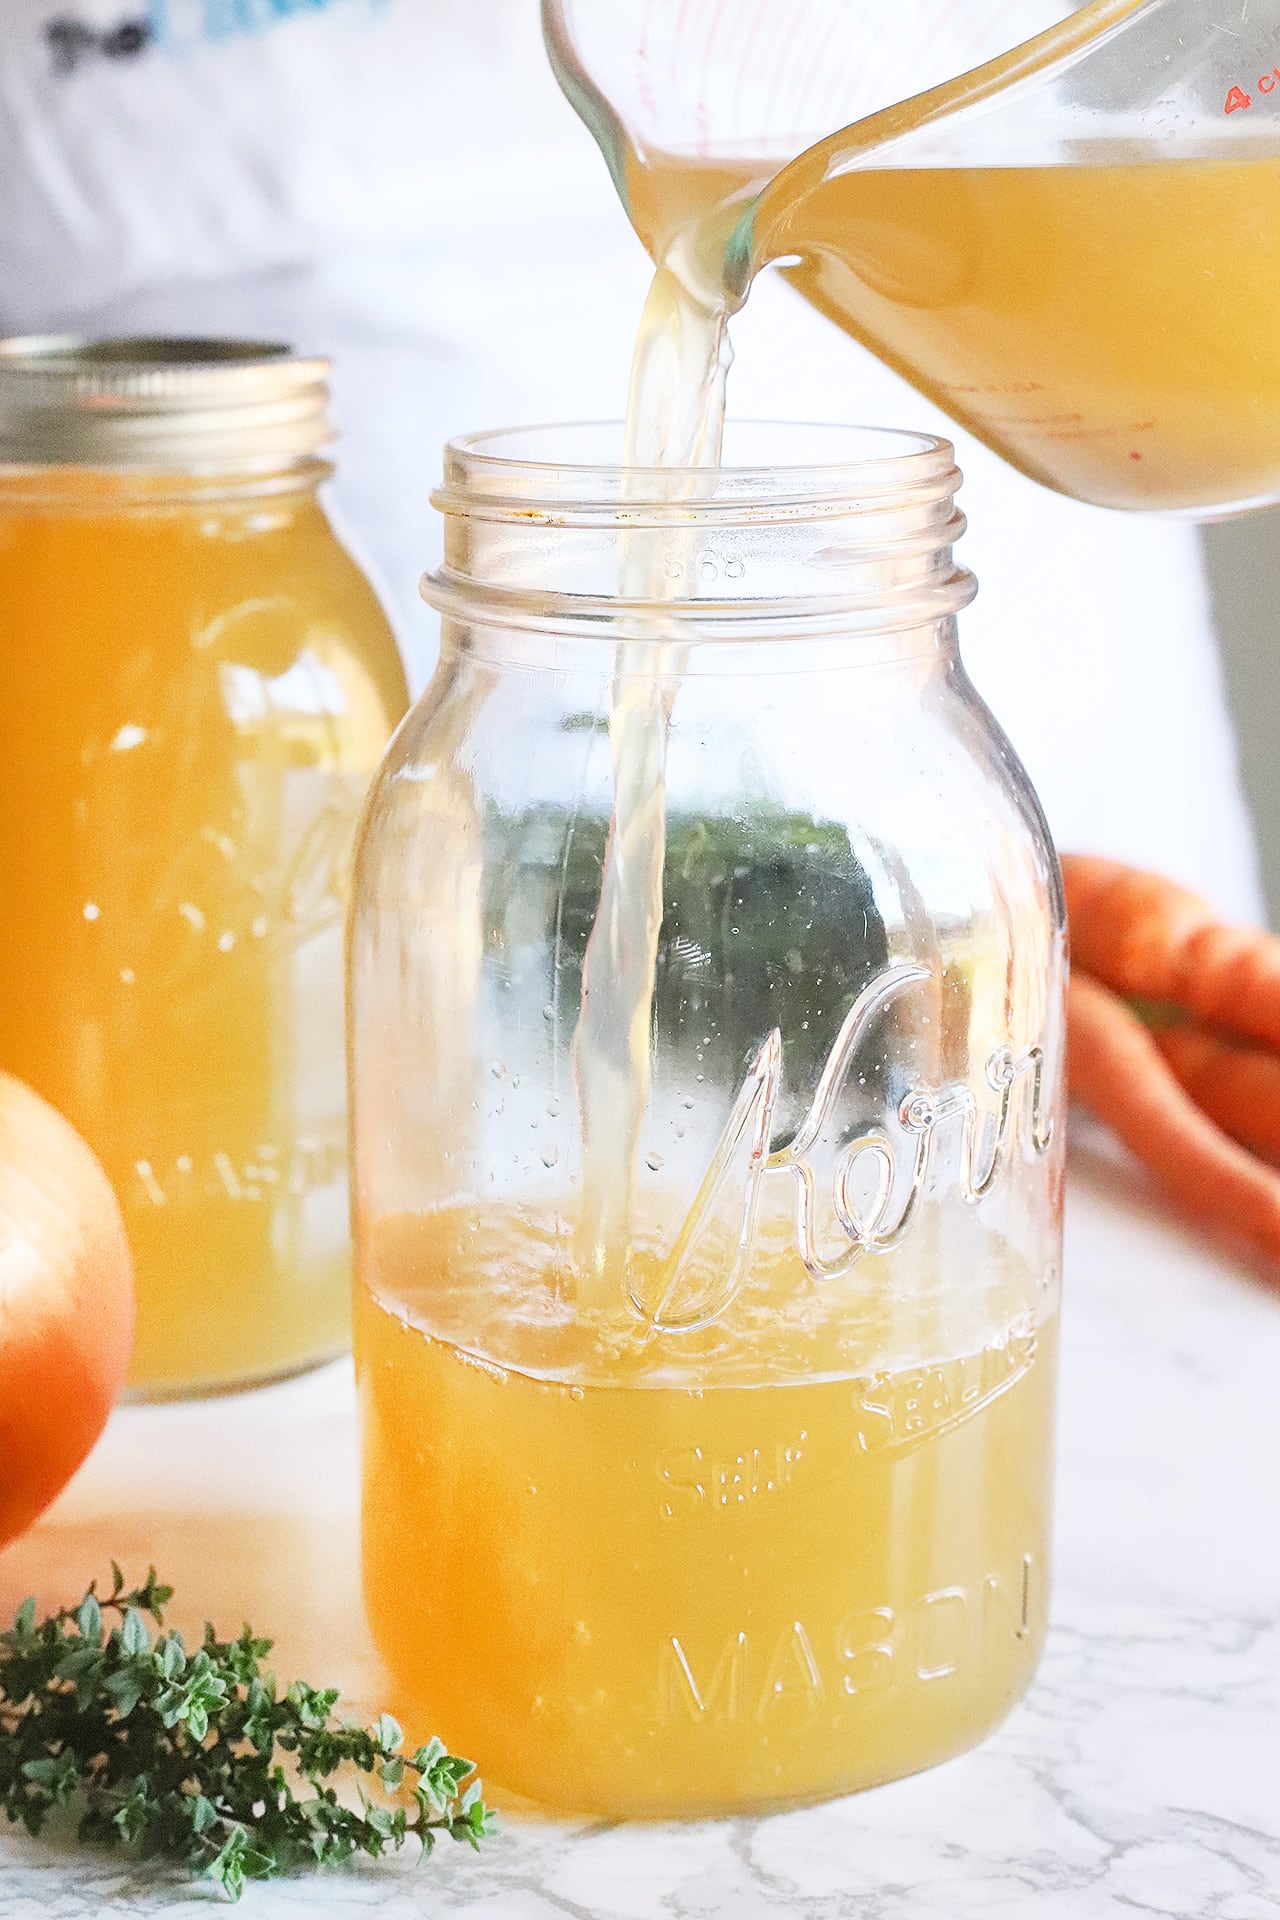 Pouring homemade chicken stock into a glass jar.